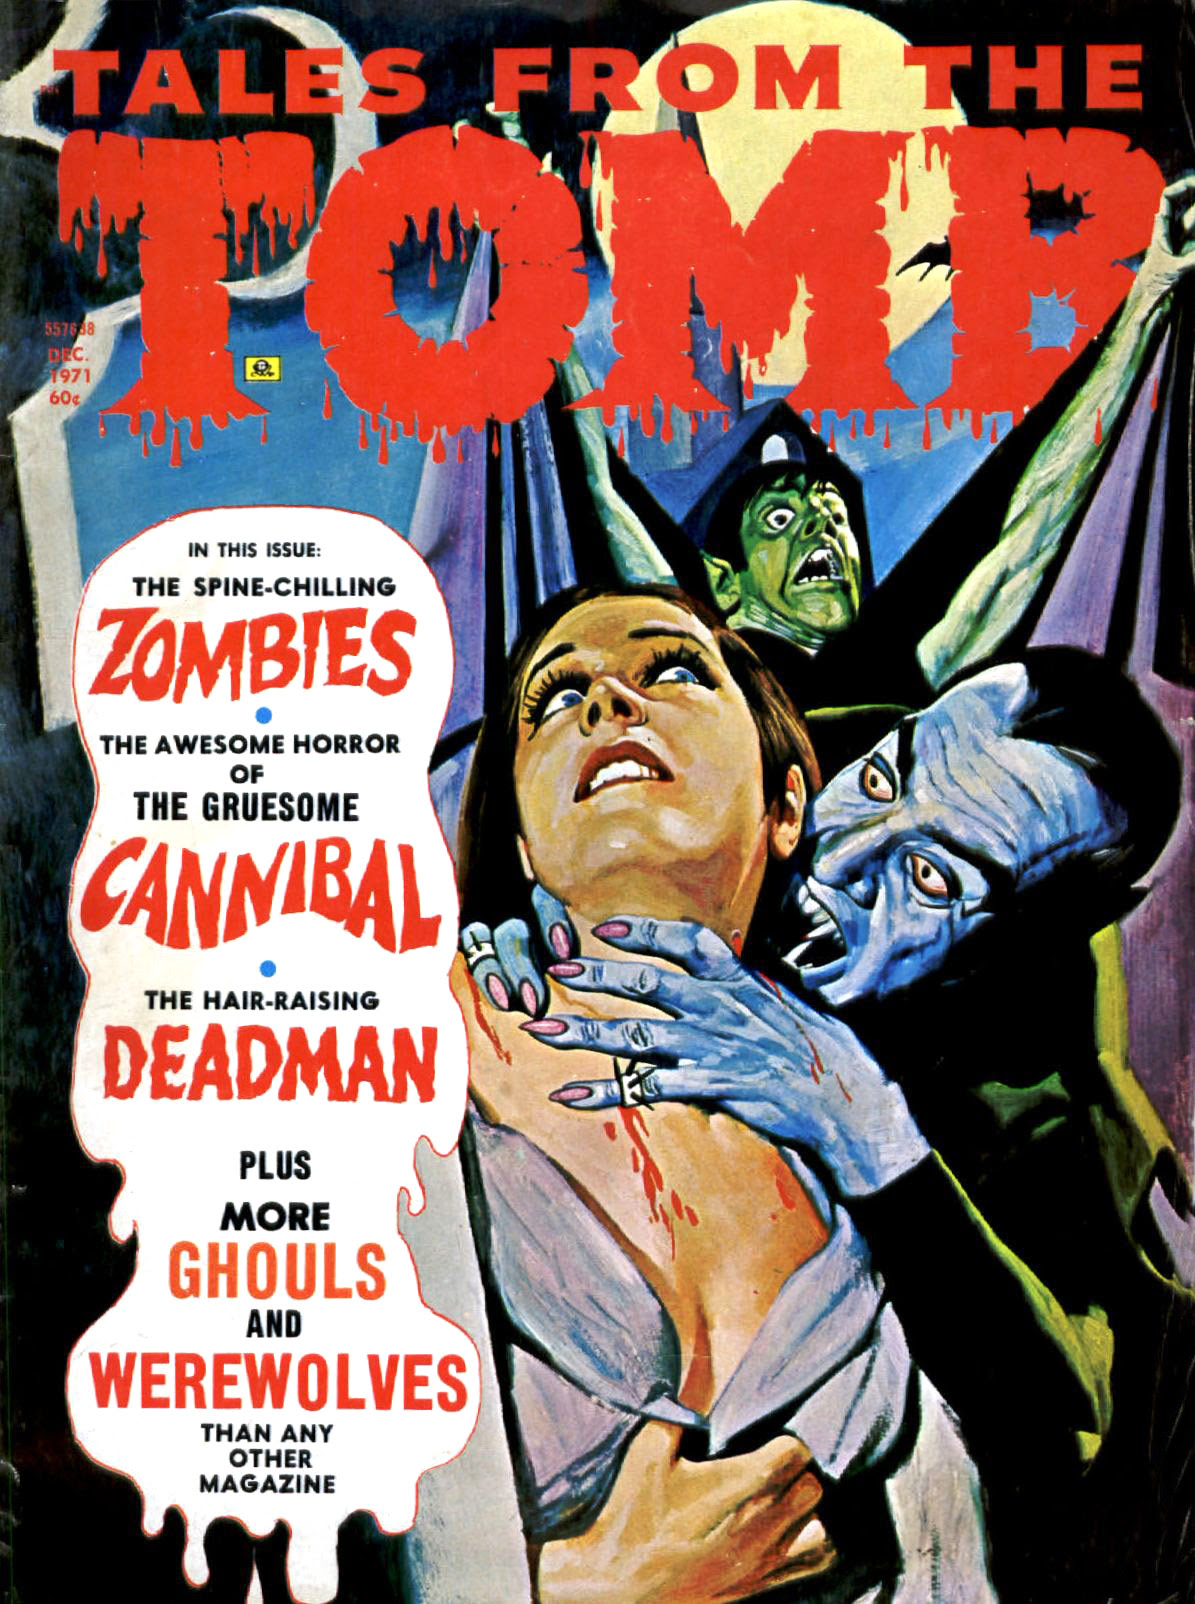 Tales from the Tomb - Vol. 3 #6 (Eerie Publications, 1971) 